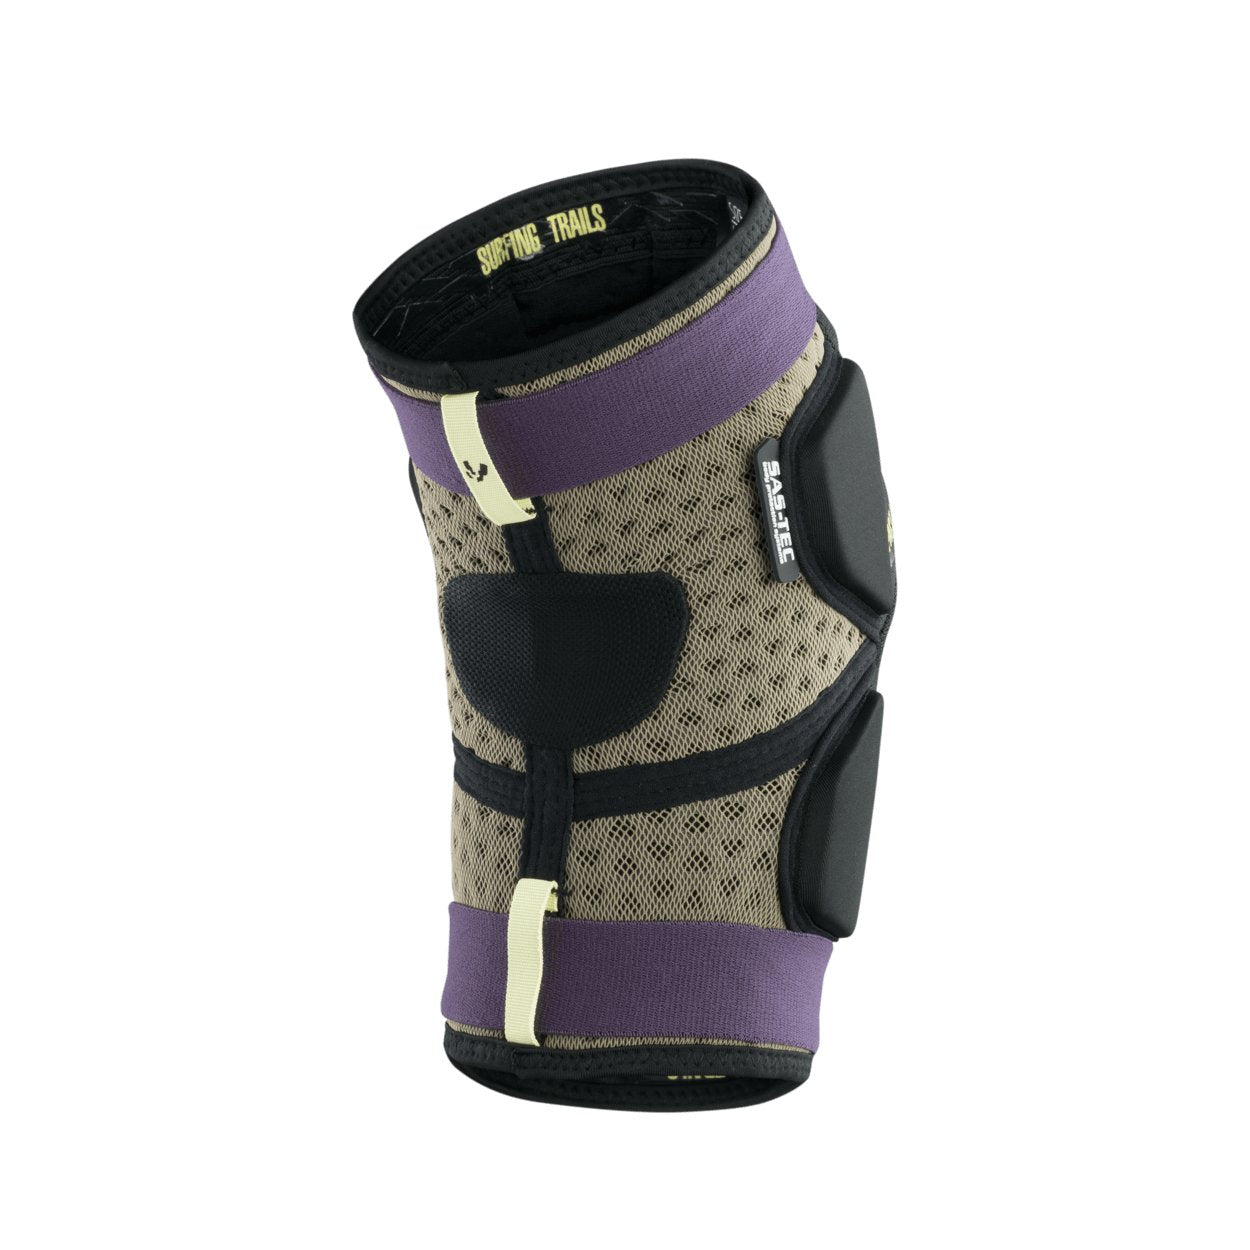 ION Youth MTB Knee Pads K-Pact 2024 - Worthing Watersports - 9010583104607 - Body Armor - ION Bike